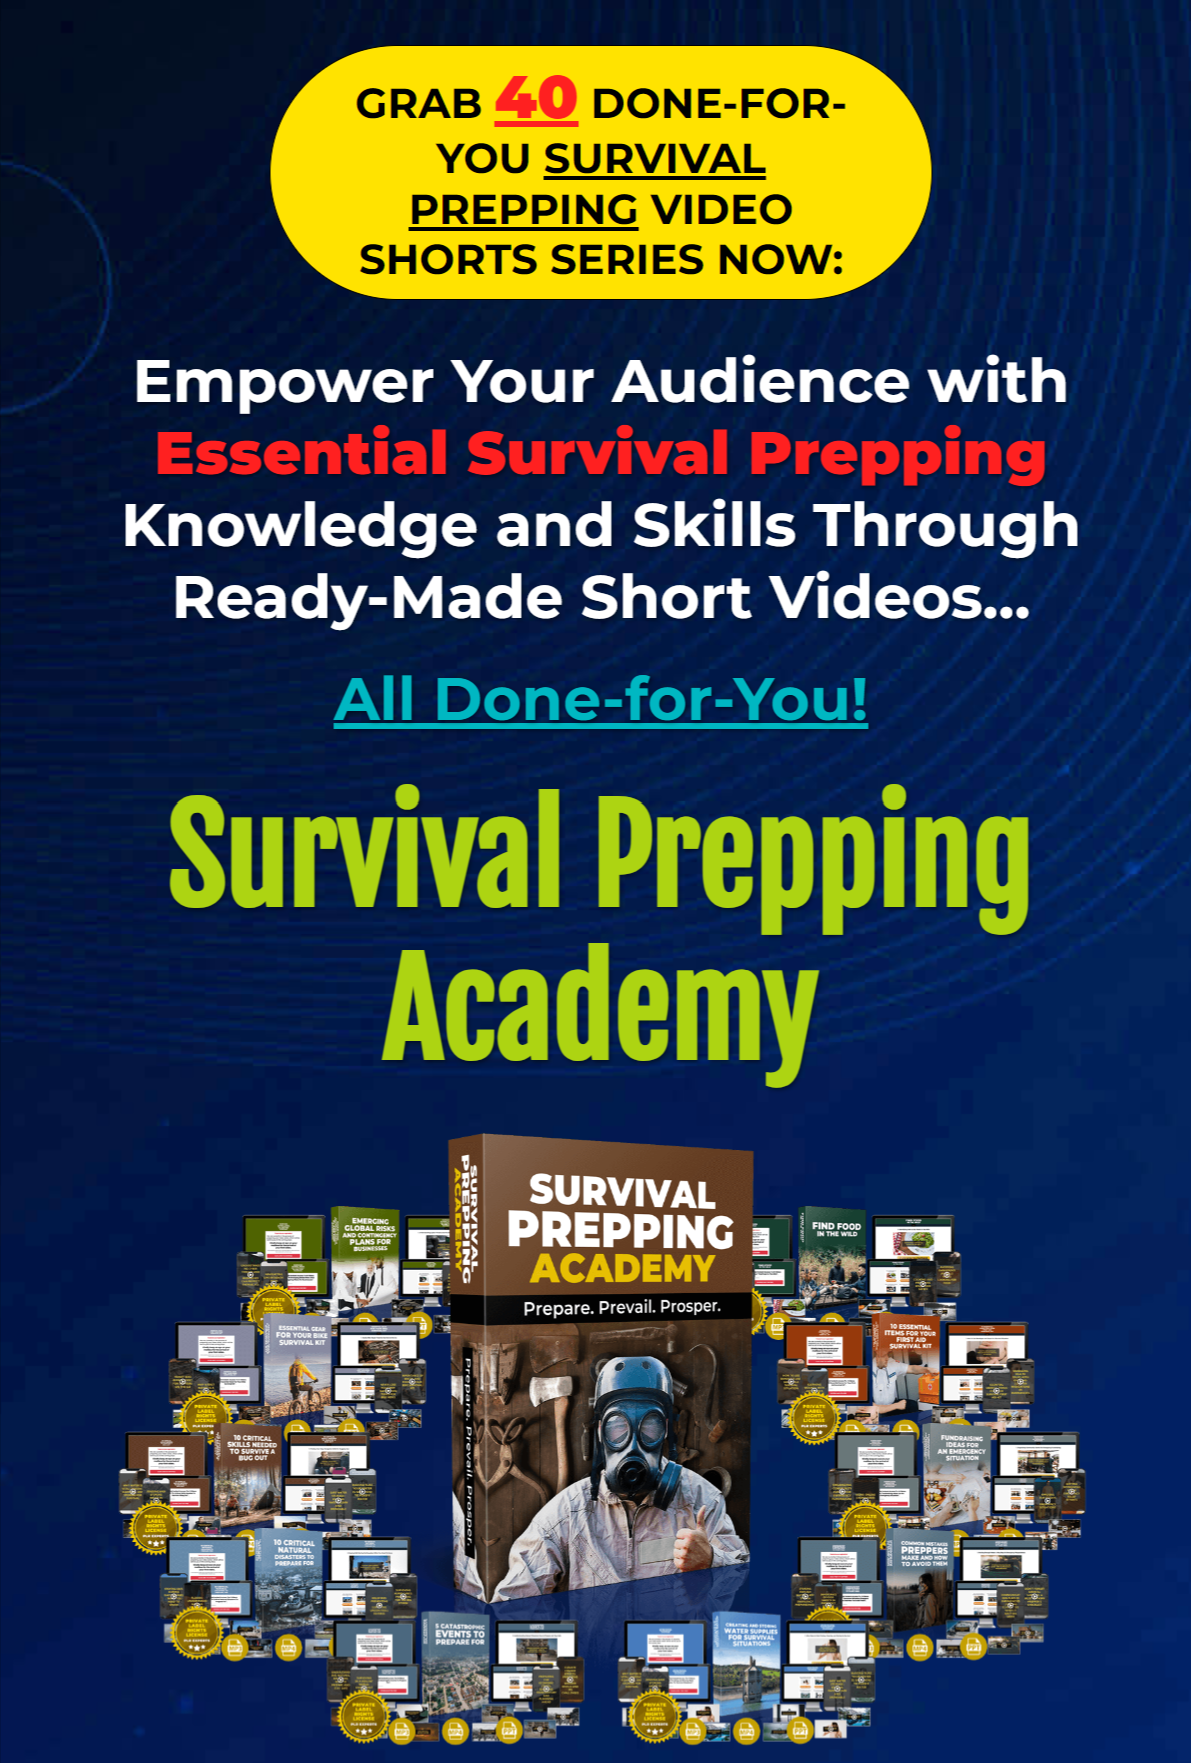 Survival Prepping Academy PLR Survival & Preppers Videos Review - Essential Survival Prepping Knowledge and Skills Through Ready-Made Short Videos. [A PLR]